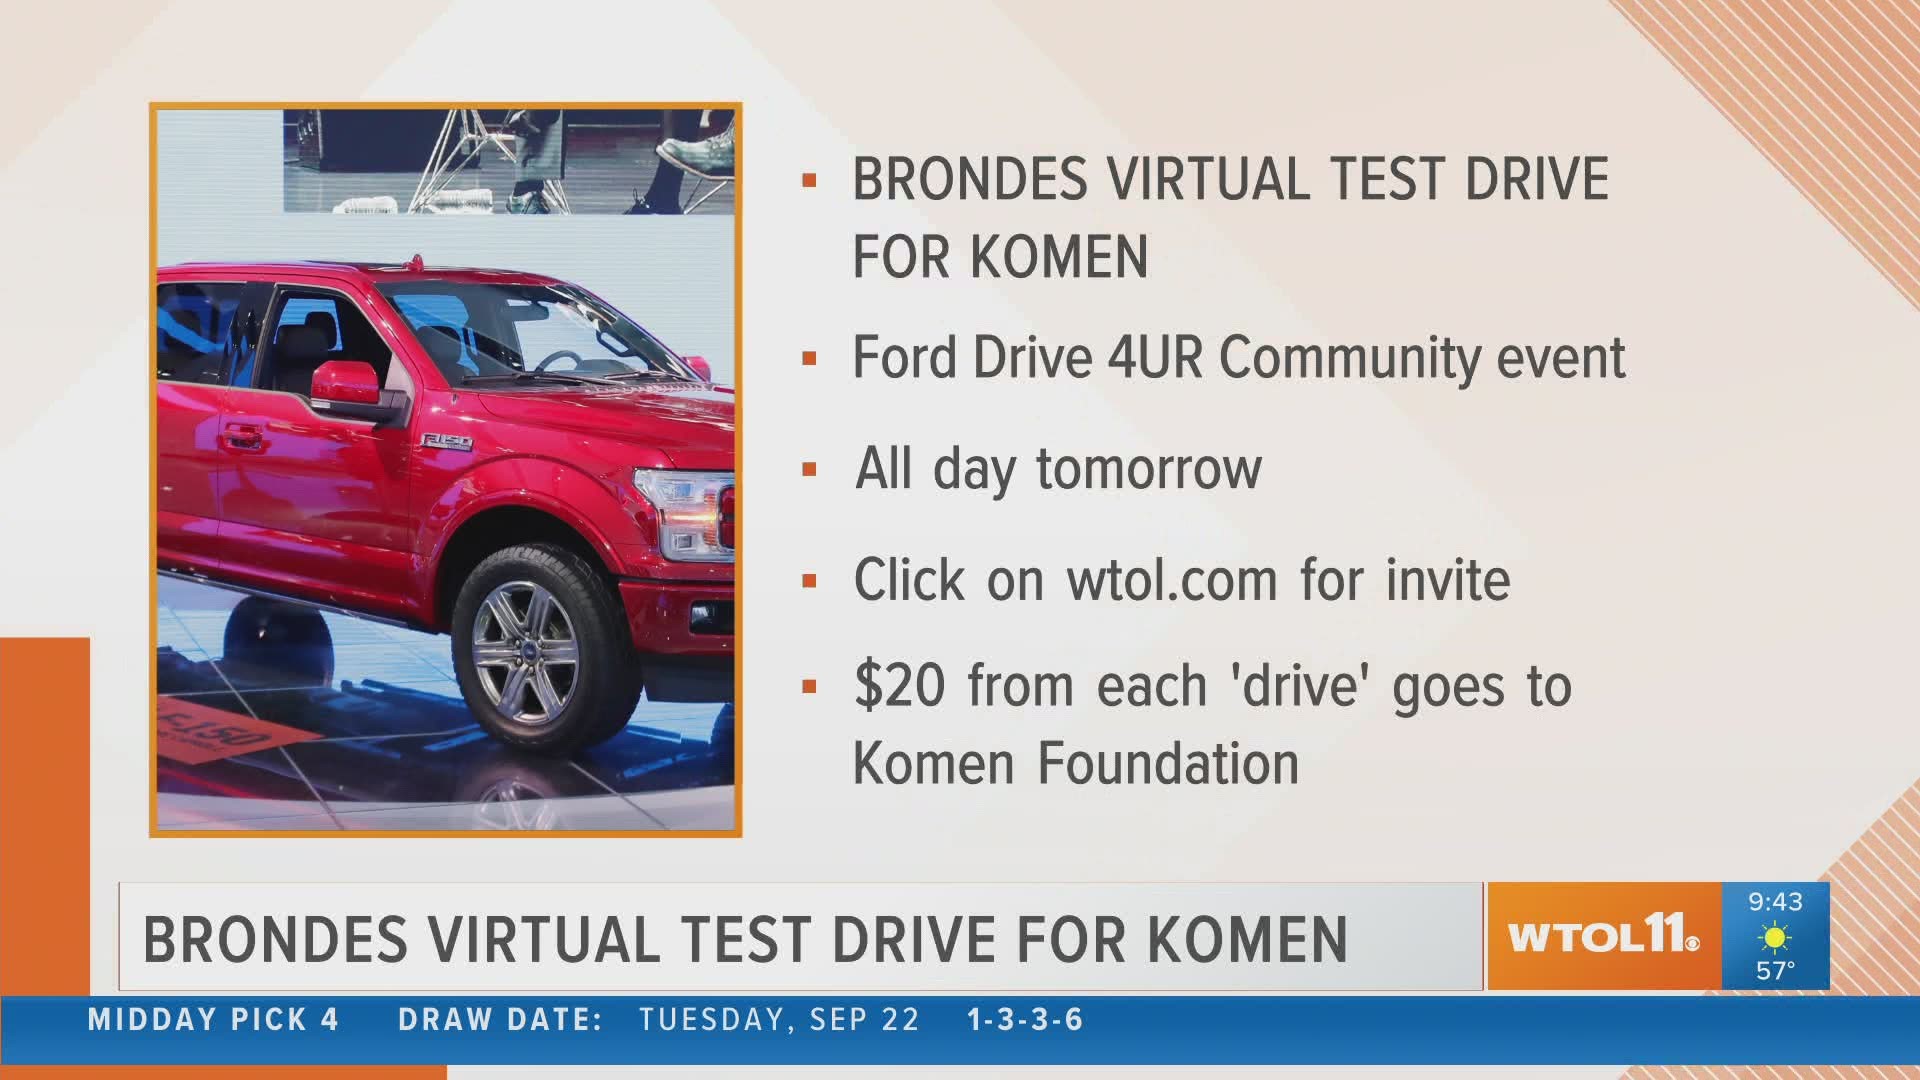 There's a first time for everything! Test drive a vehicle virtually with Brondes Ford to benefit Susan G. Komen Northwest Ohio!